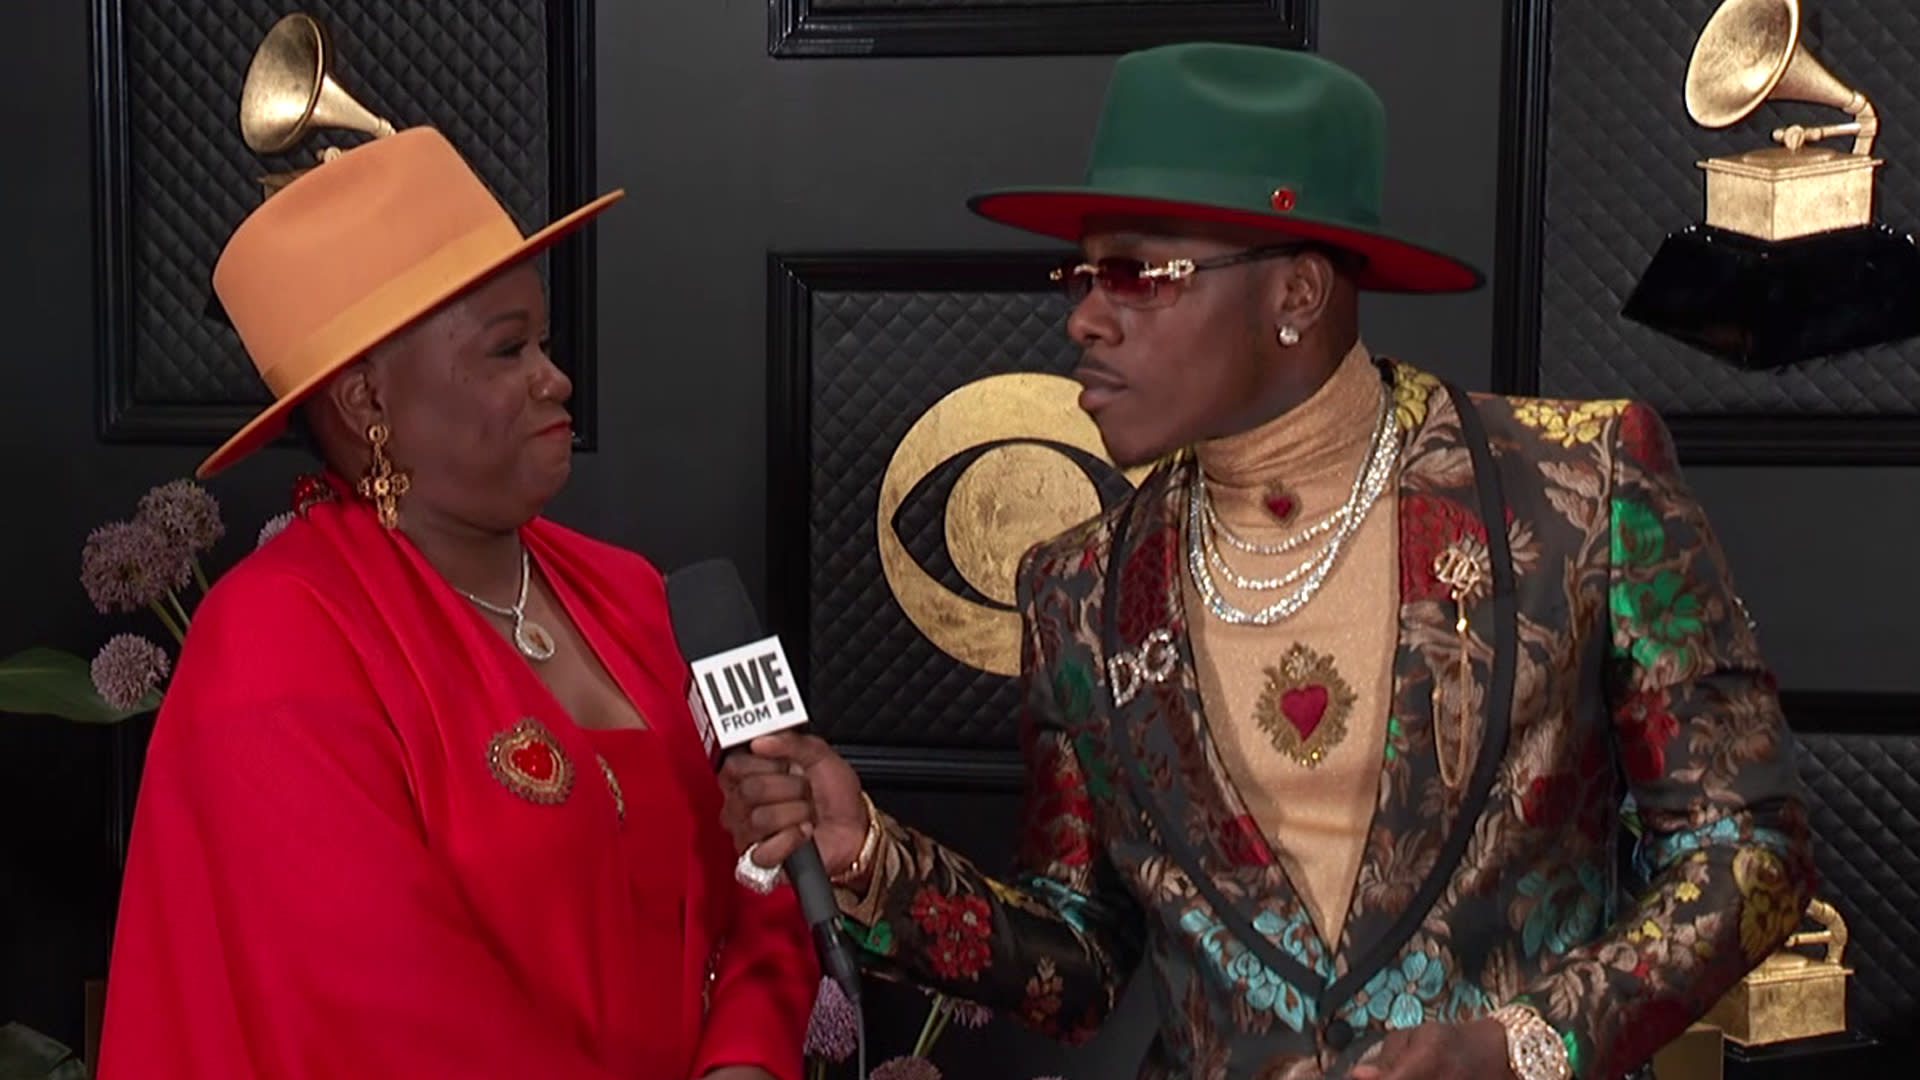 DaBaby Rocks a Flashy Printed Suit For Grammys 2021: Photo 4532714, 2021  Grammys, DaBaby, Grammys Photos